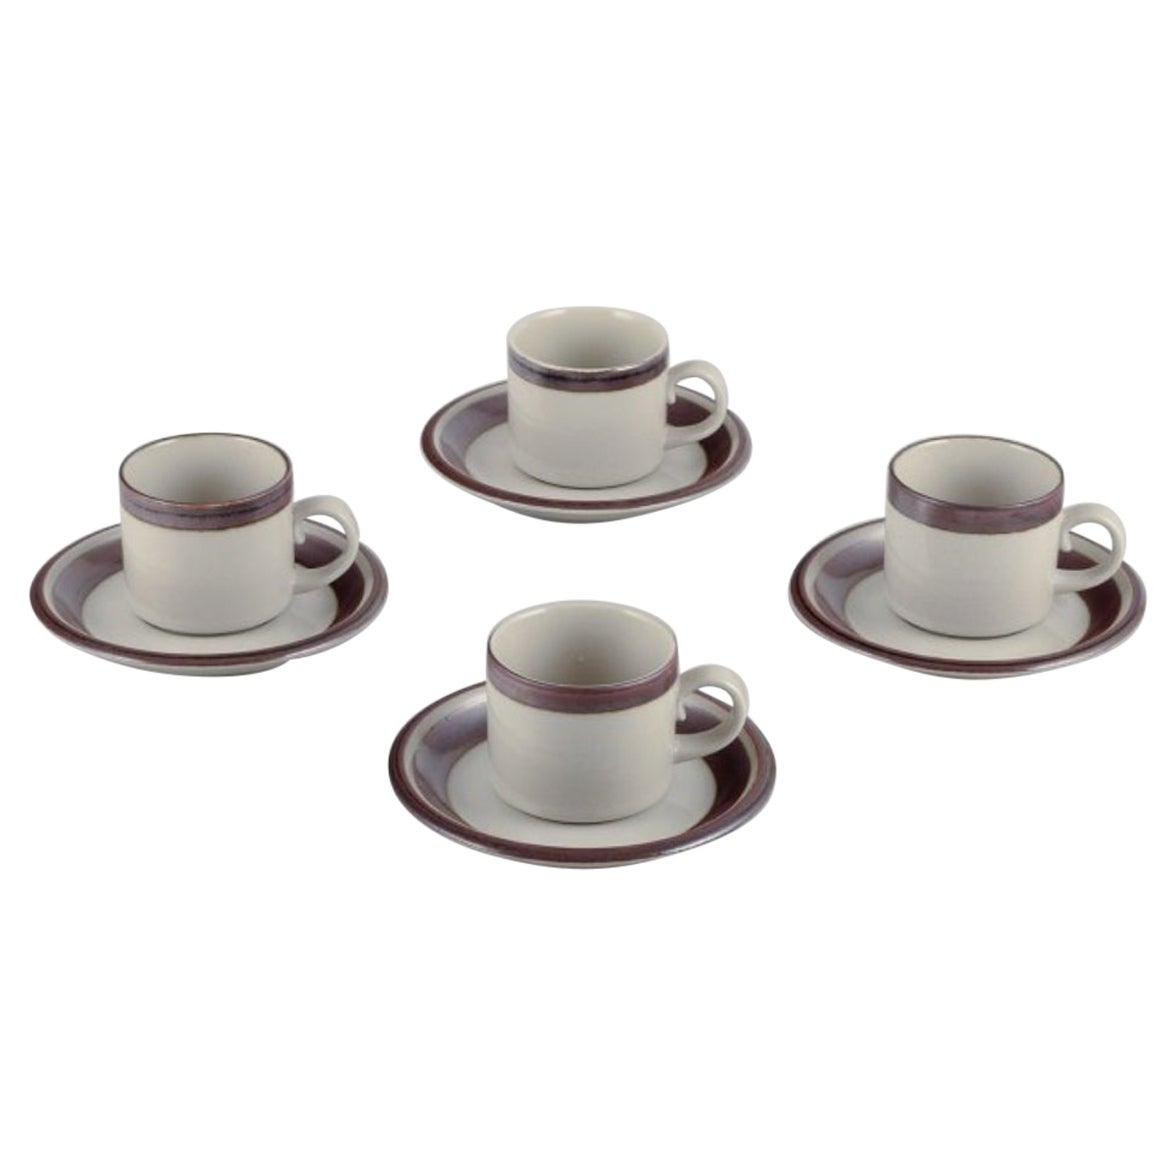 Arabia, Finland. "Karelia". Four sets of small coffee cups and saucers.